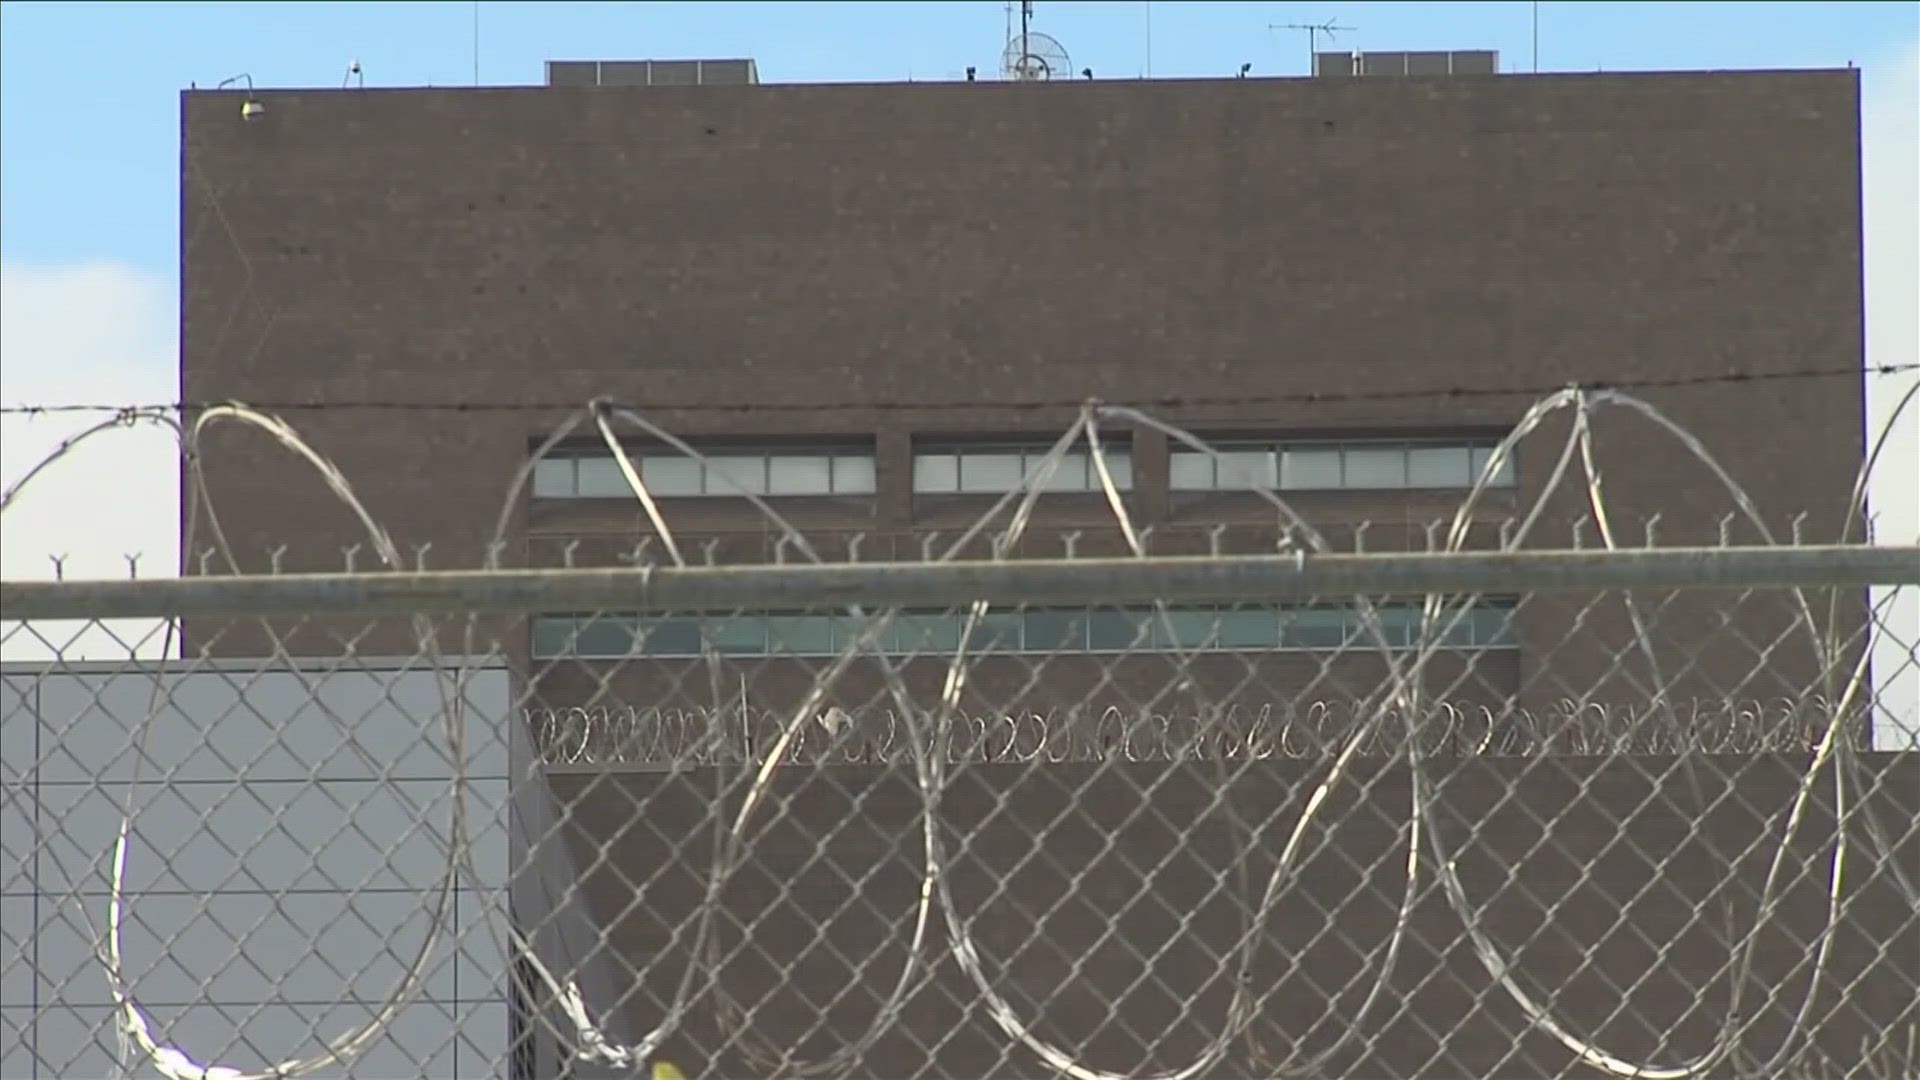 The inmate was found unresponsive Wednesday around 4 a.m. at the Shelby County Jail due to an apparent suicide.